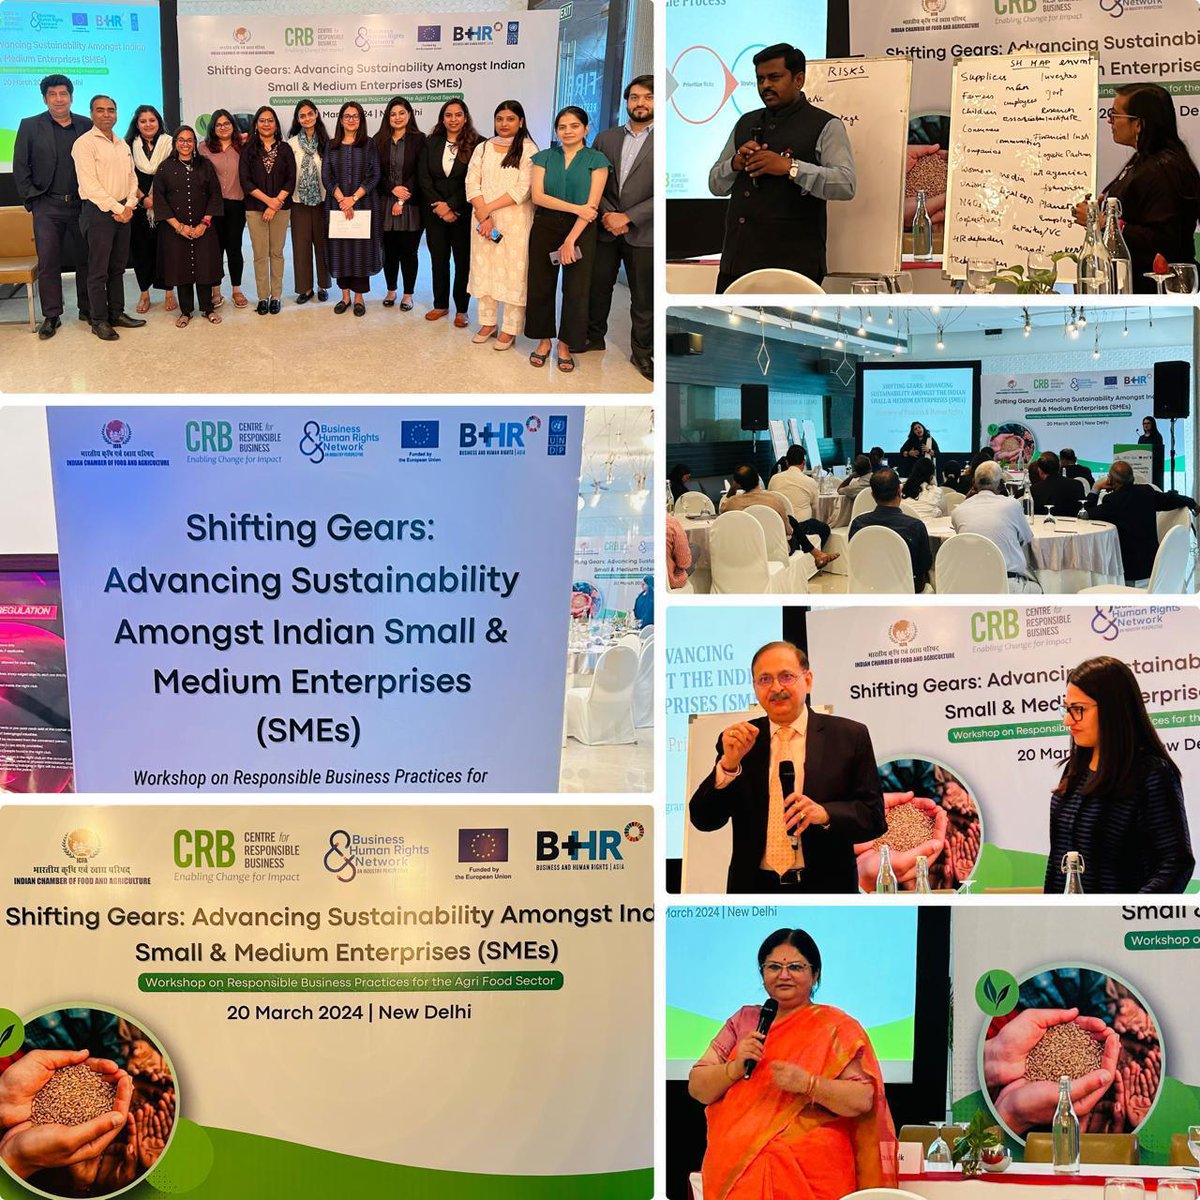 ICFA collaborated with the @Centre4RespBiz and @UNDP to host a dynamic workshop titled 'Advancing Sustainability Amongst Small and Medium Enterprises' yesterday in New Delhi. #food #agriculture #sustainable #agritech #business #development #growth #organic #research #TrendingNow